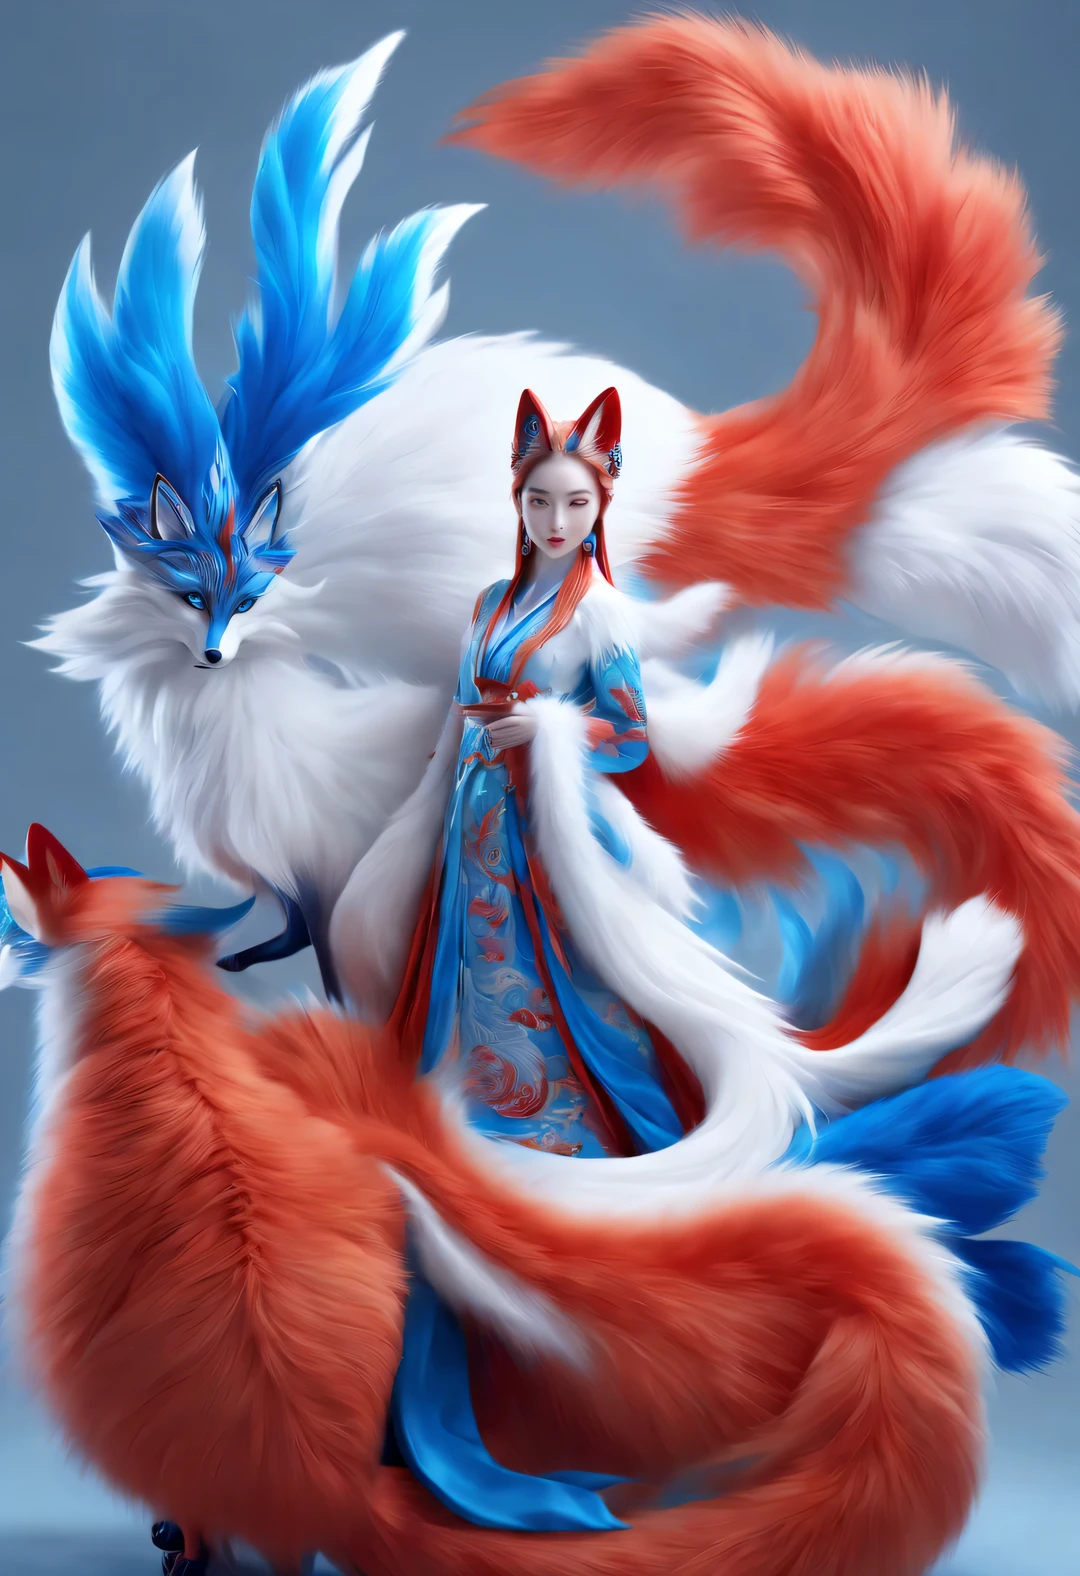 Zbrush style red and blue fashion painting, Oriental style, Soft realism and surreal details, blue and sky blue tones, (A white hair、blue eyes、Fox with nine red tails), Lots of fluffy red tails wrapped around, Ancient Chinese mythical beasts, fantasy,Mythological background